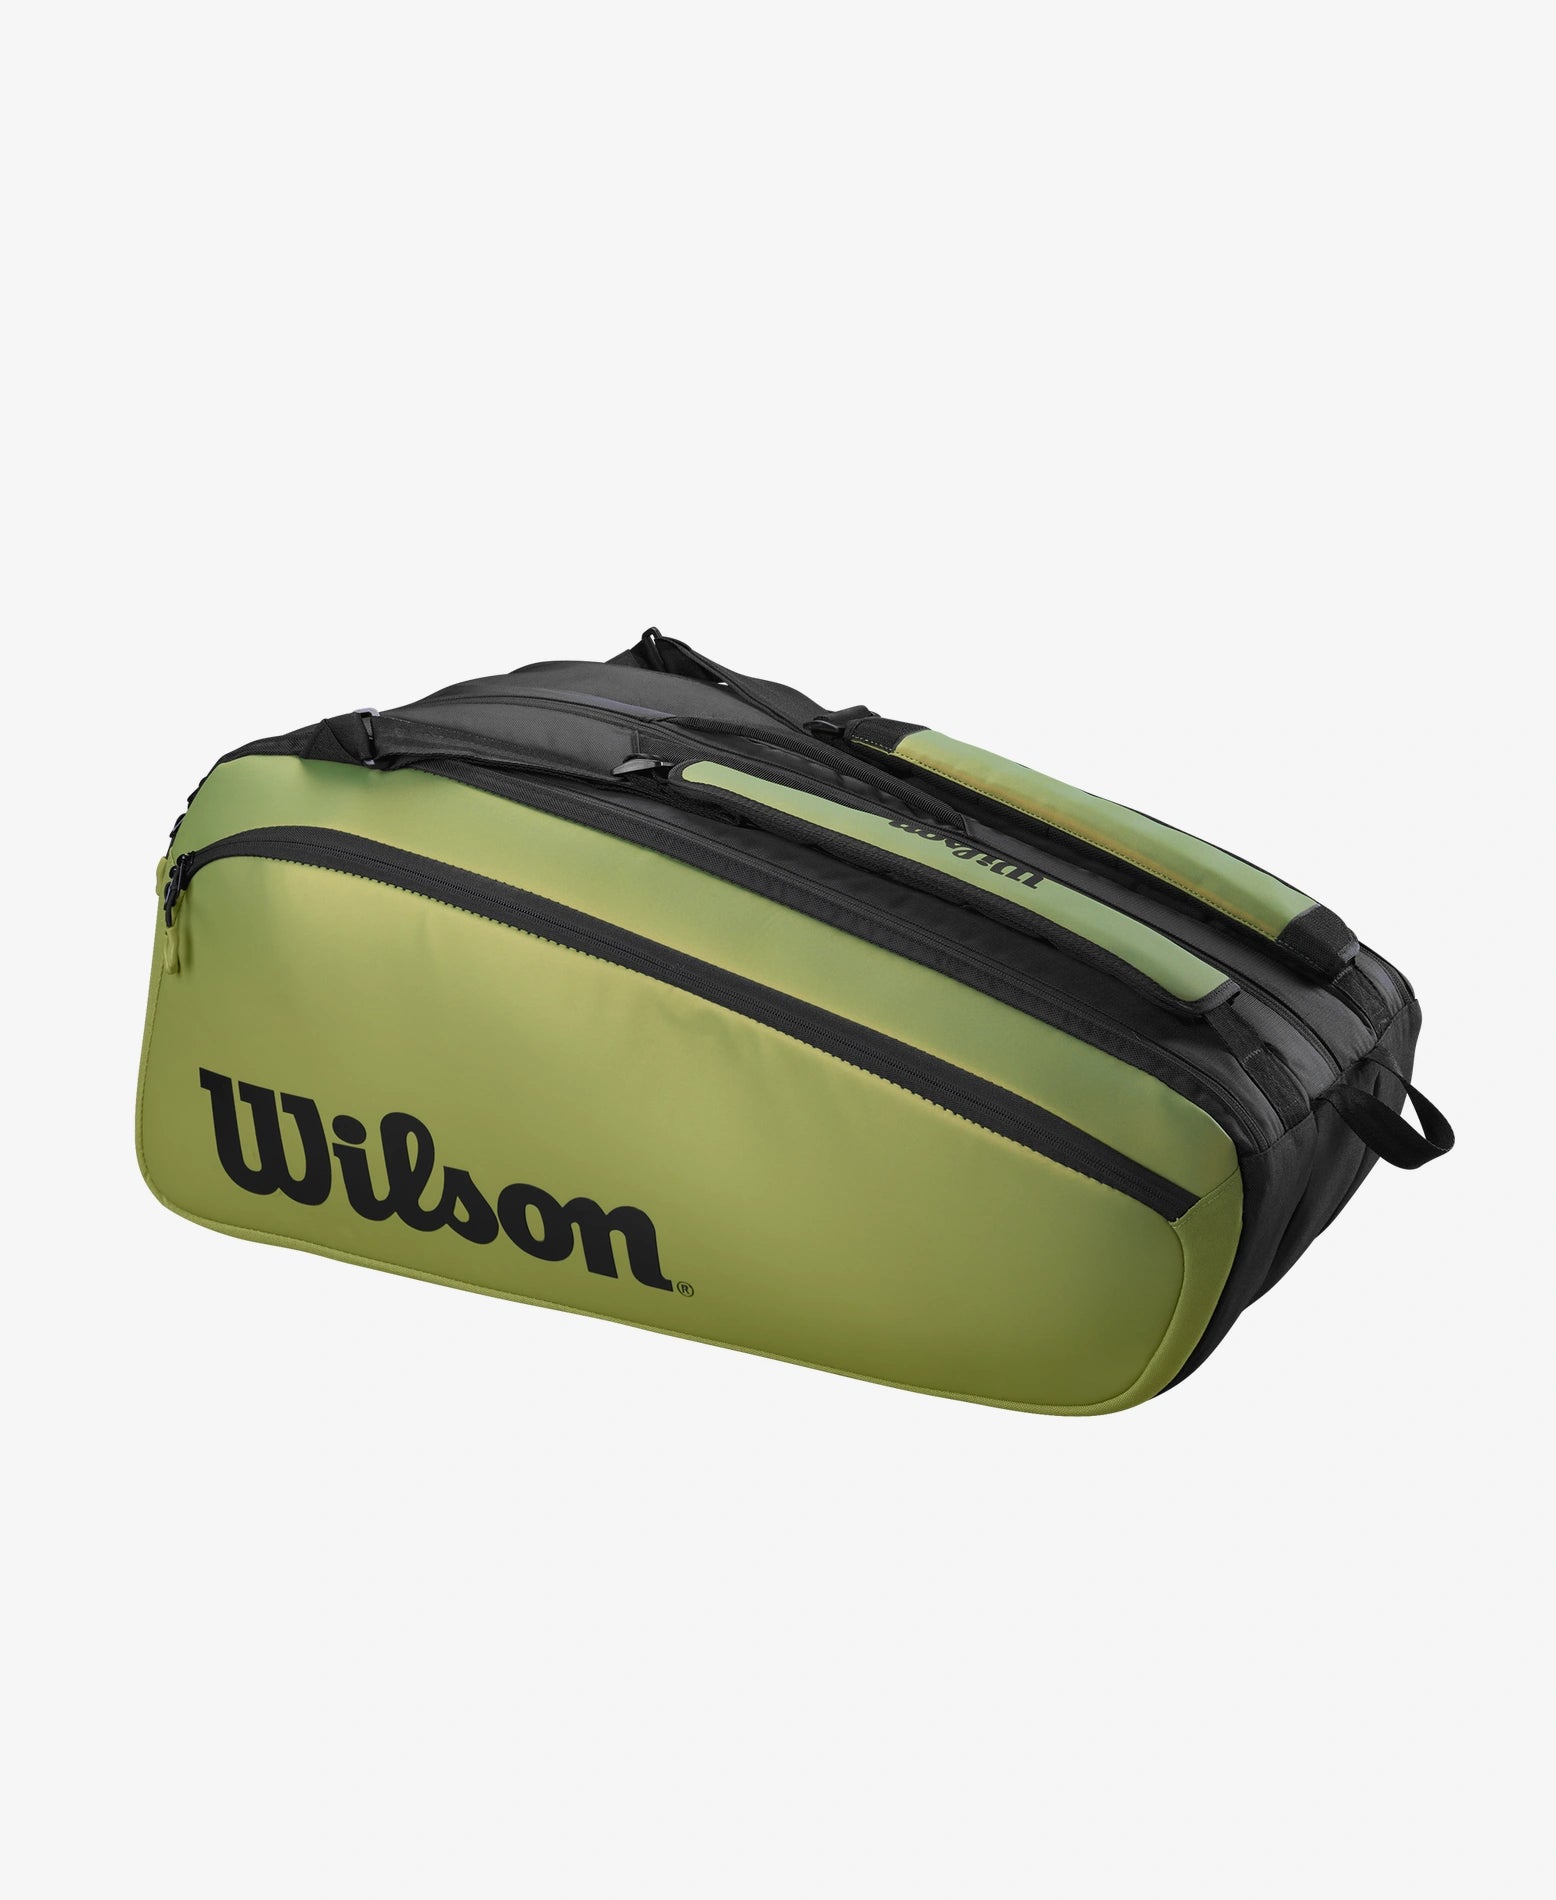 The Wilson Blade V8 Super Tour 15 Pack Racket Bag available for sale at GSM Sports.    